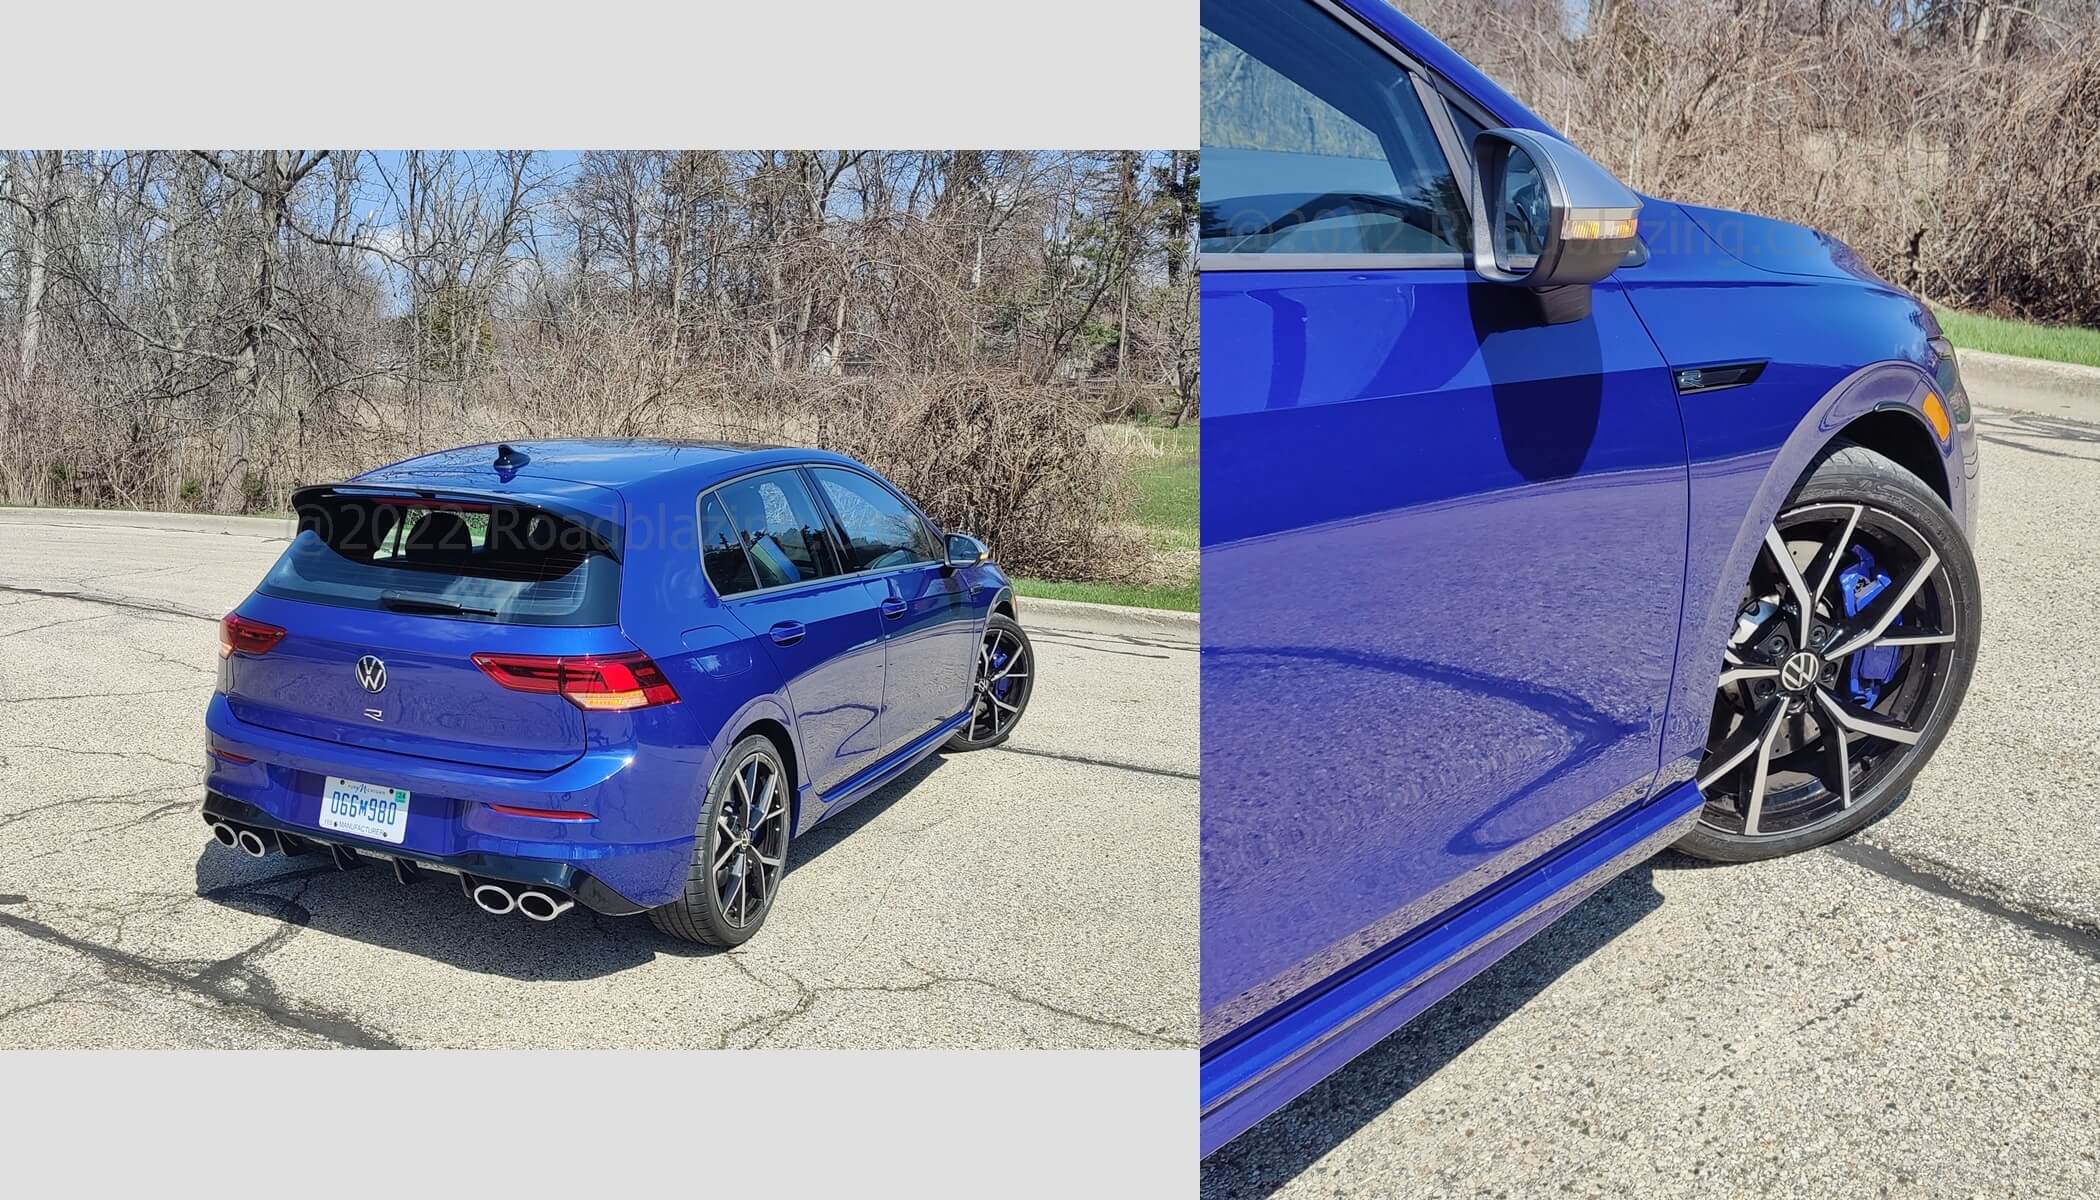 2022 Volkswagen Golf R: new lateral boomerang segmented LED taillamps provide more angular rear quarters